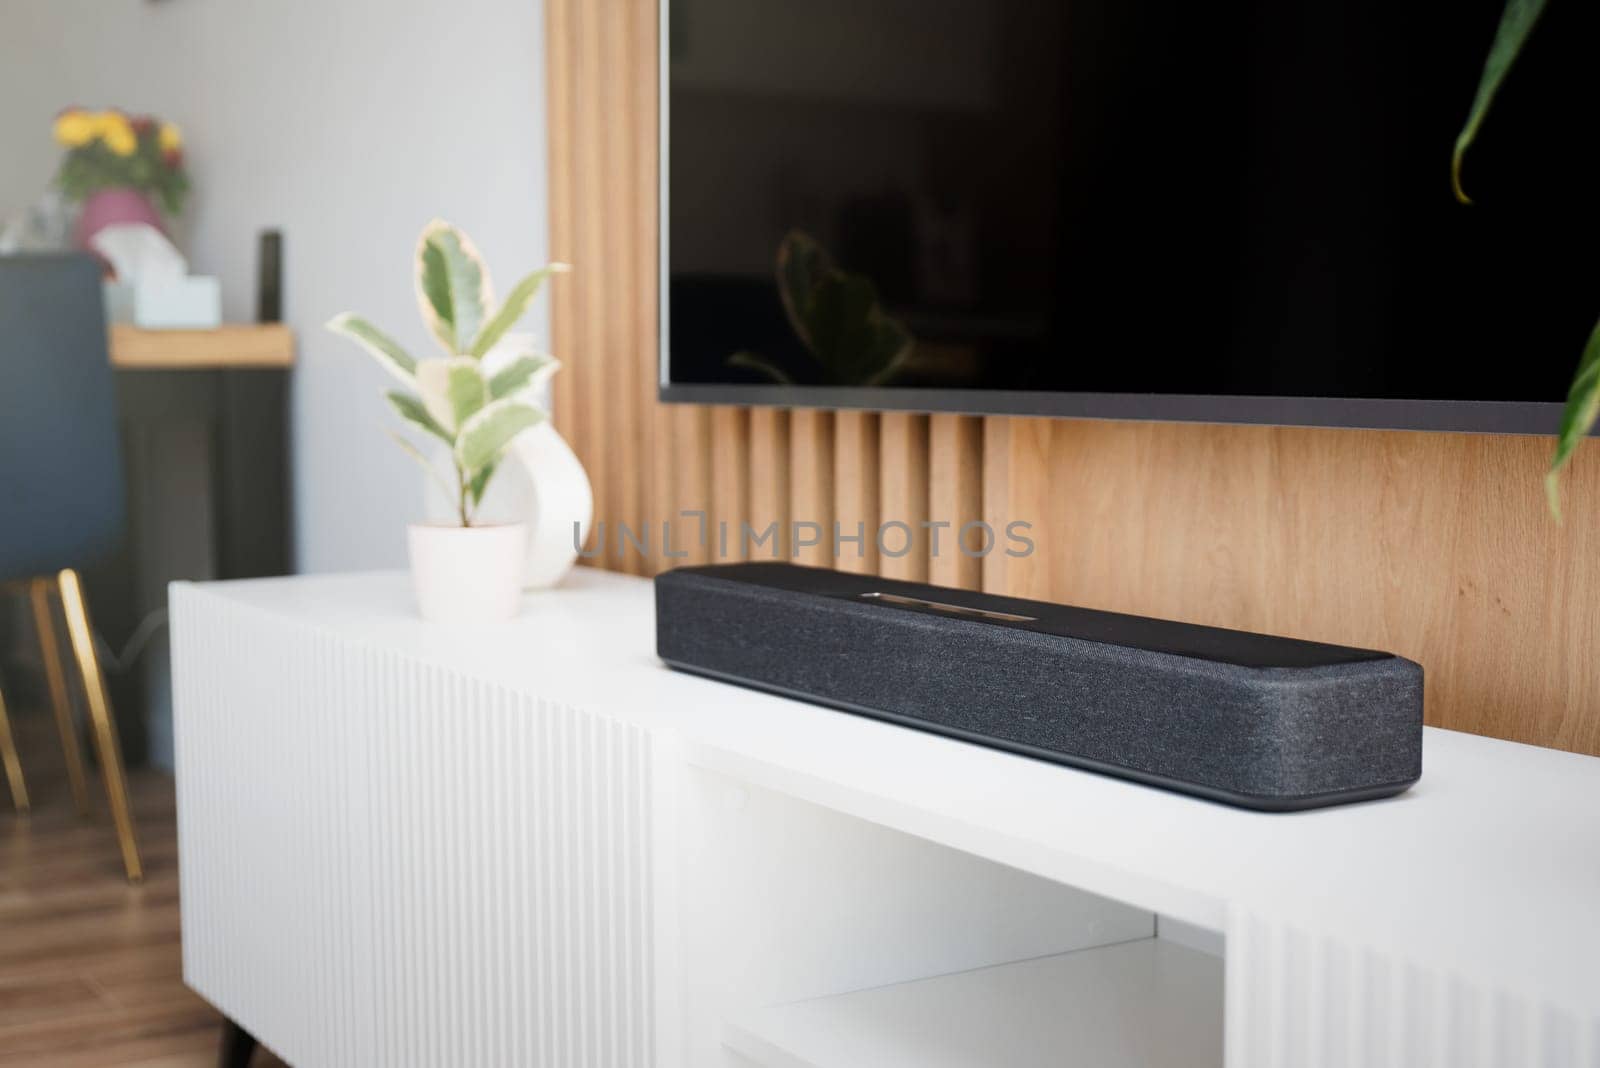 Soundbar in a modern home. Listening to music in living room